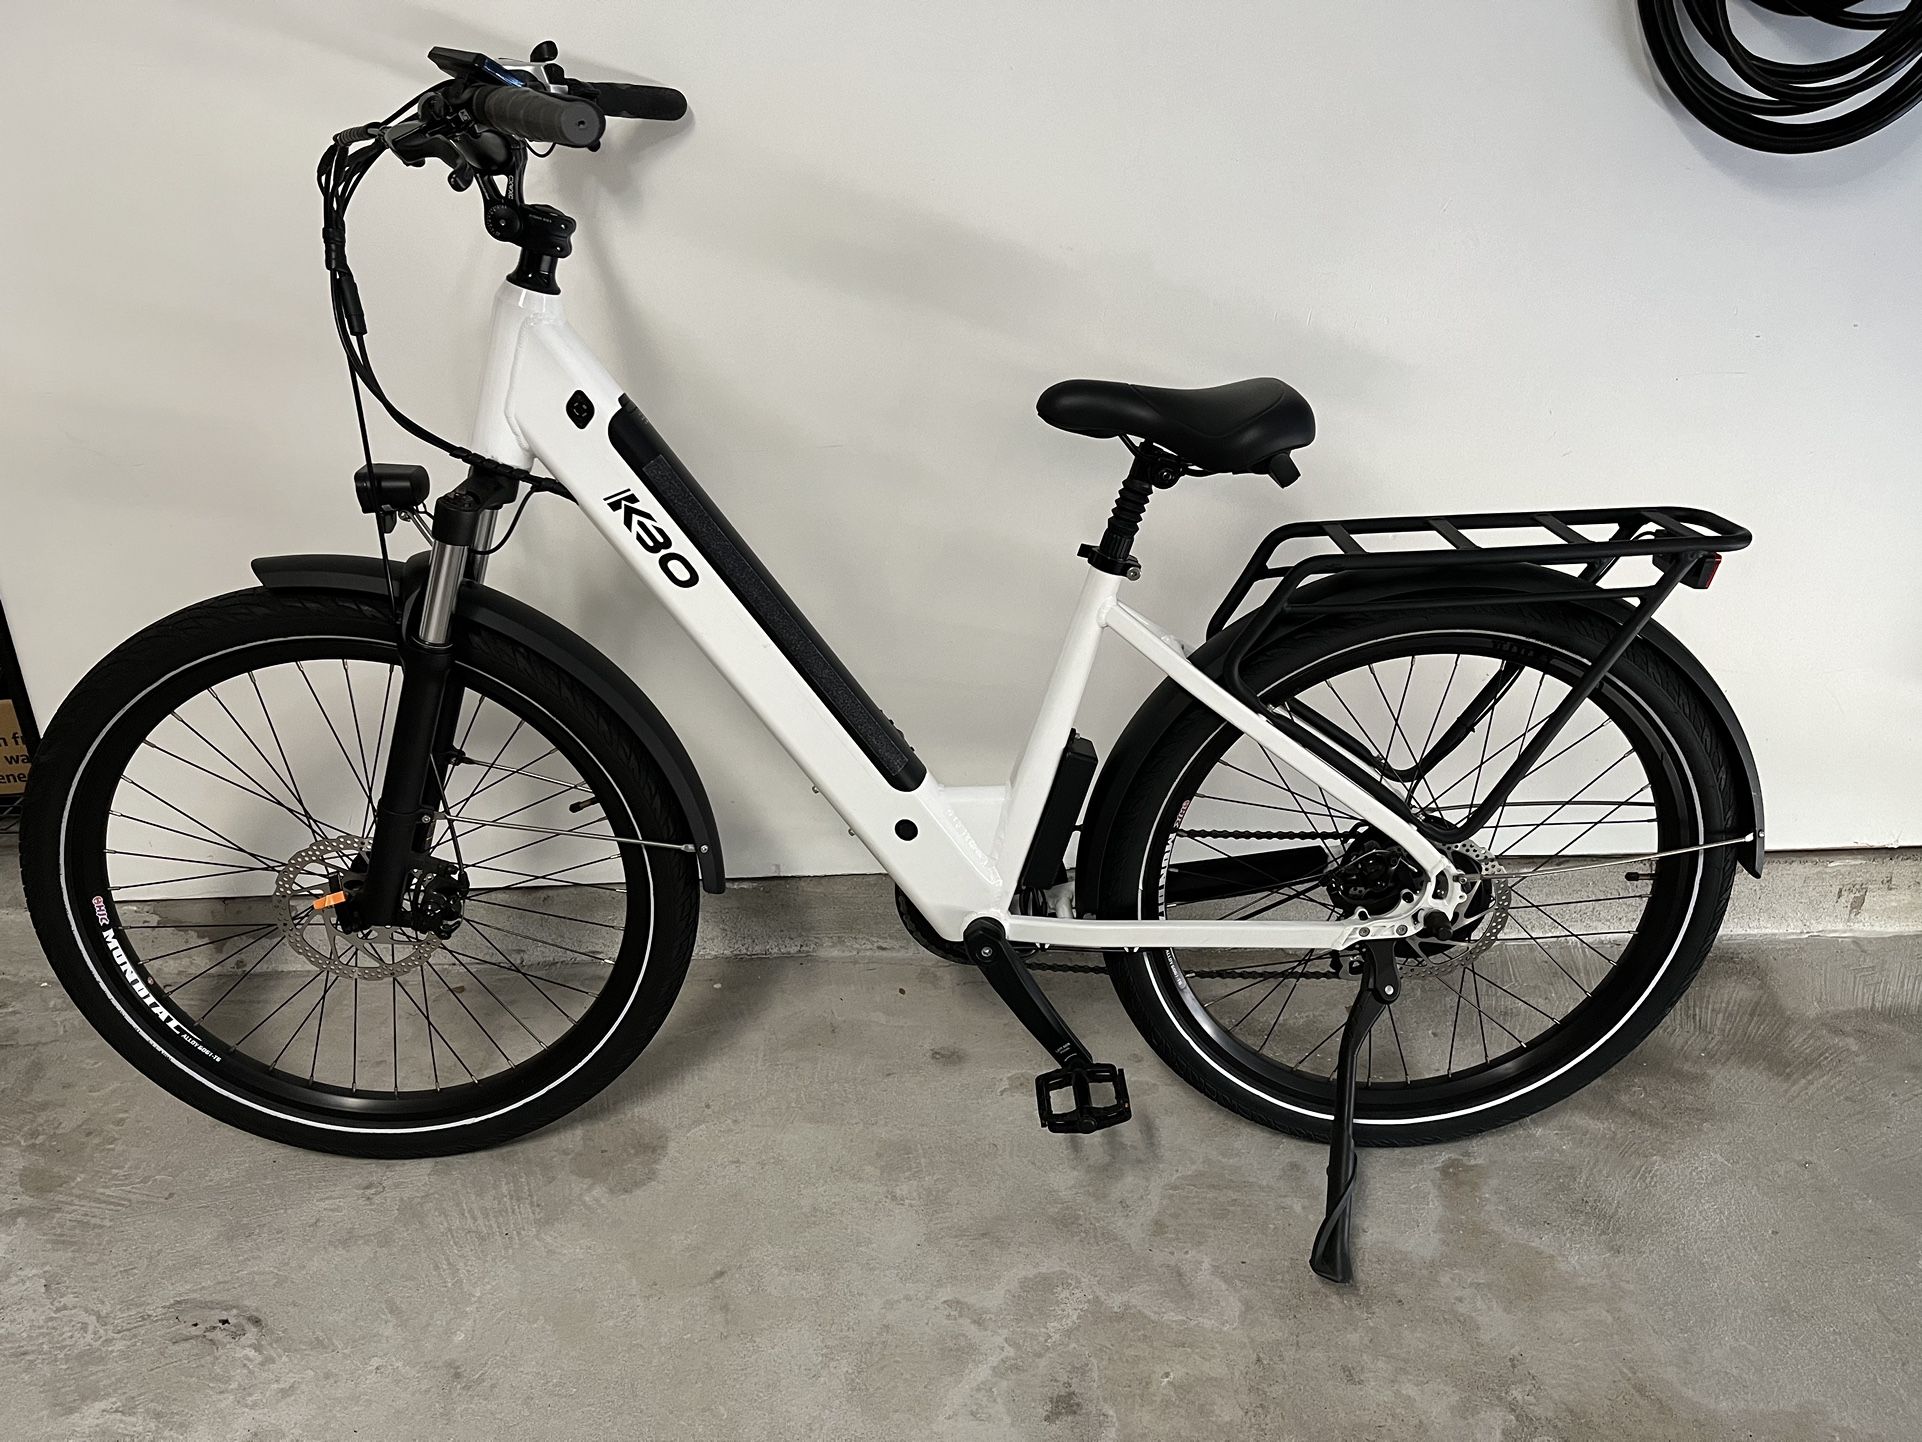 KBO Breeze ST Electric Bike “If you see it still available “